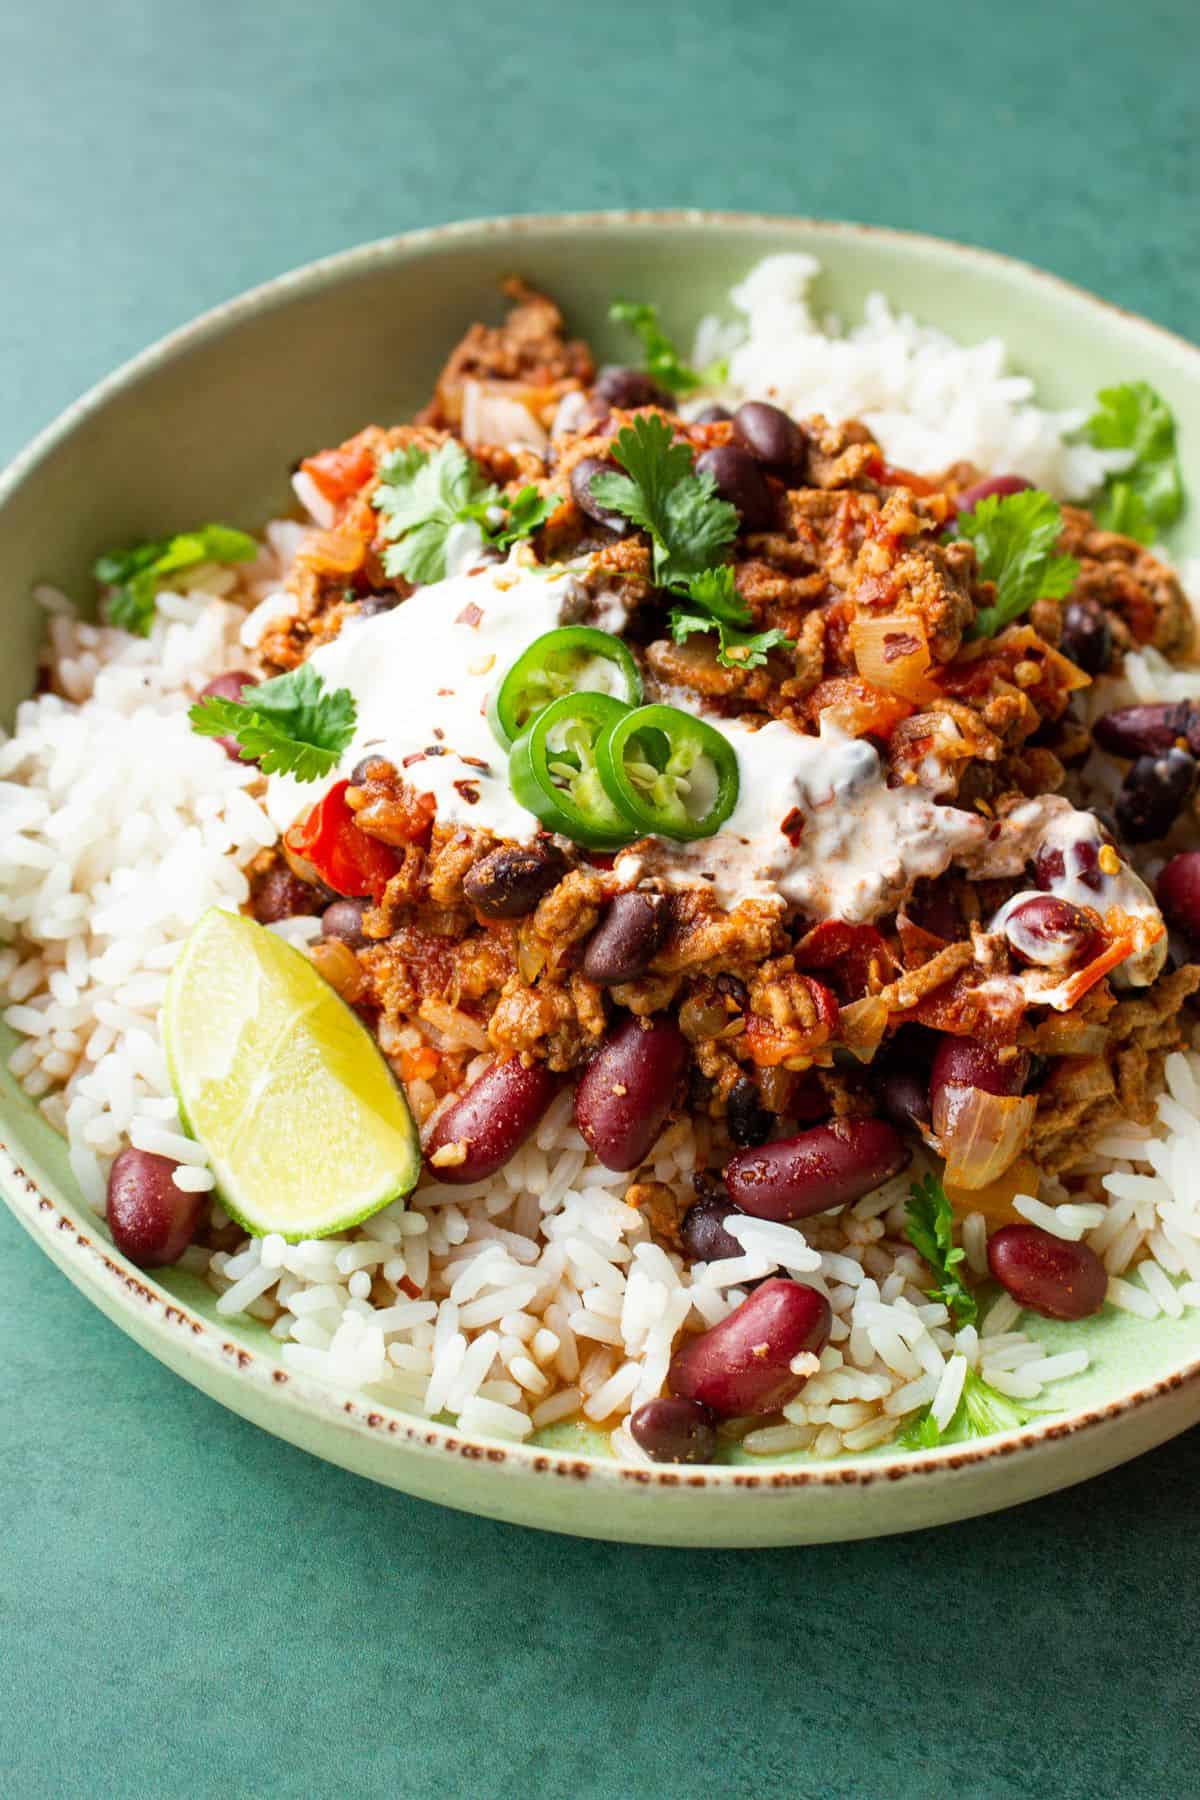 Close up of a bowl of slow cooker chilli con carne, garnished with wedge of lime, green chilli slices, coriander and sour cream.